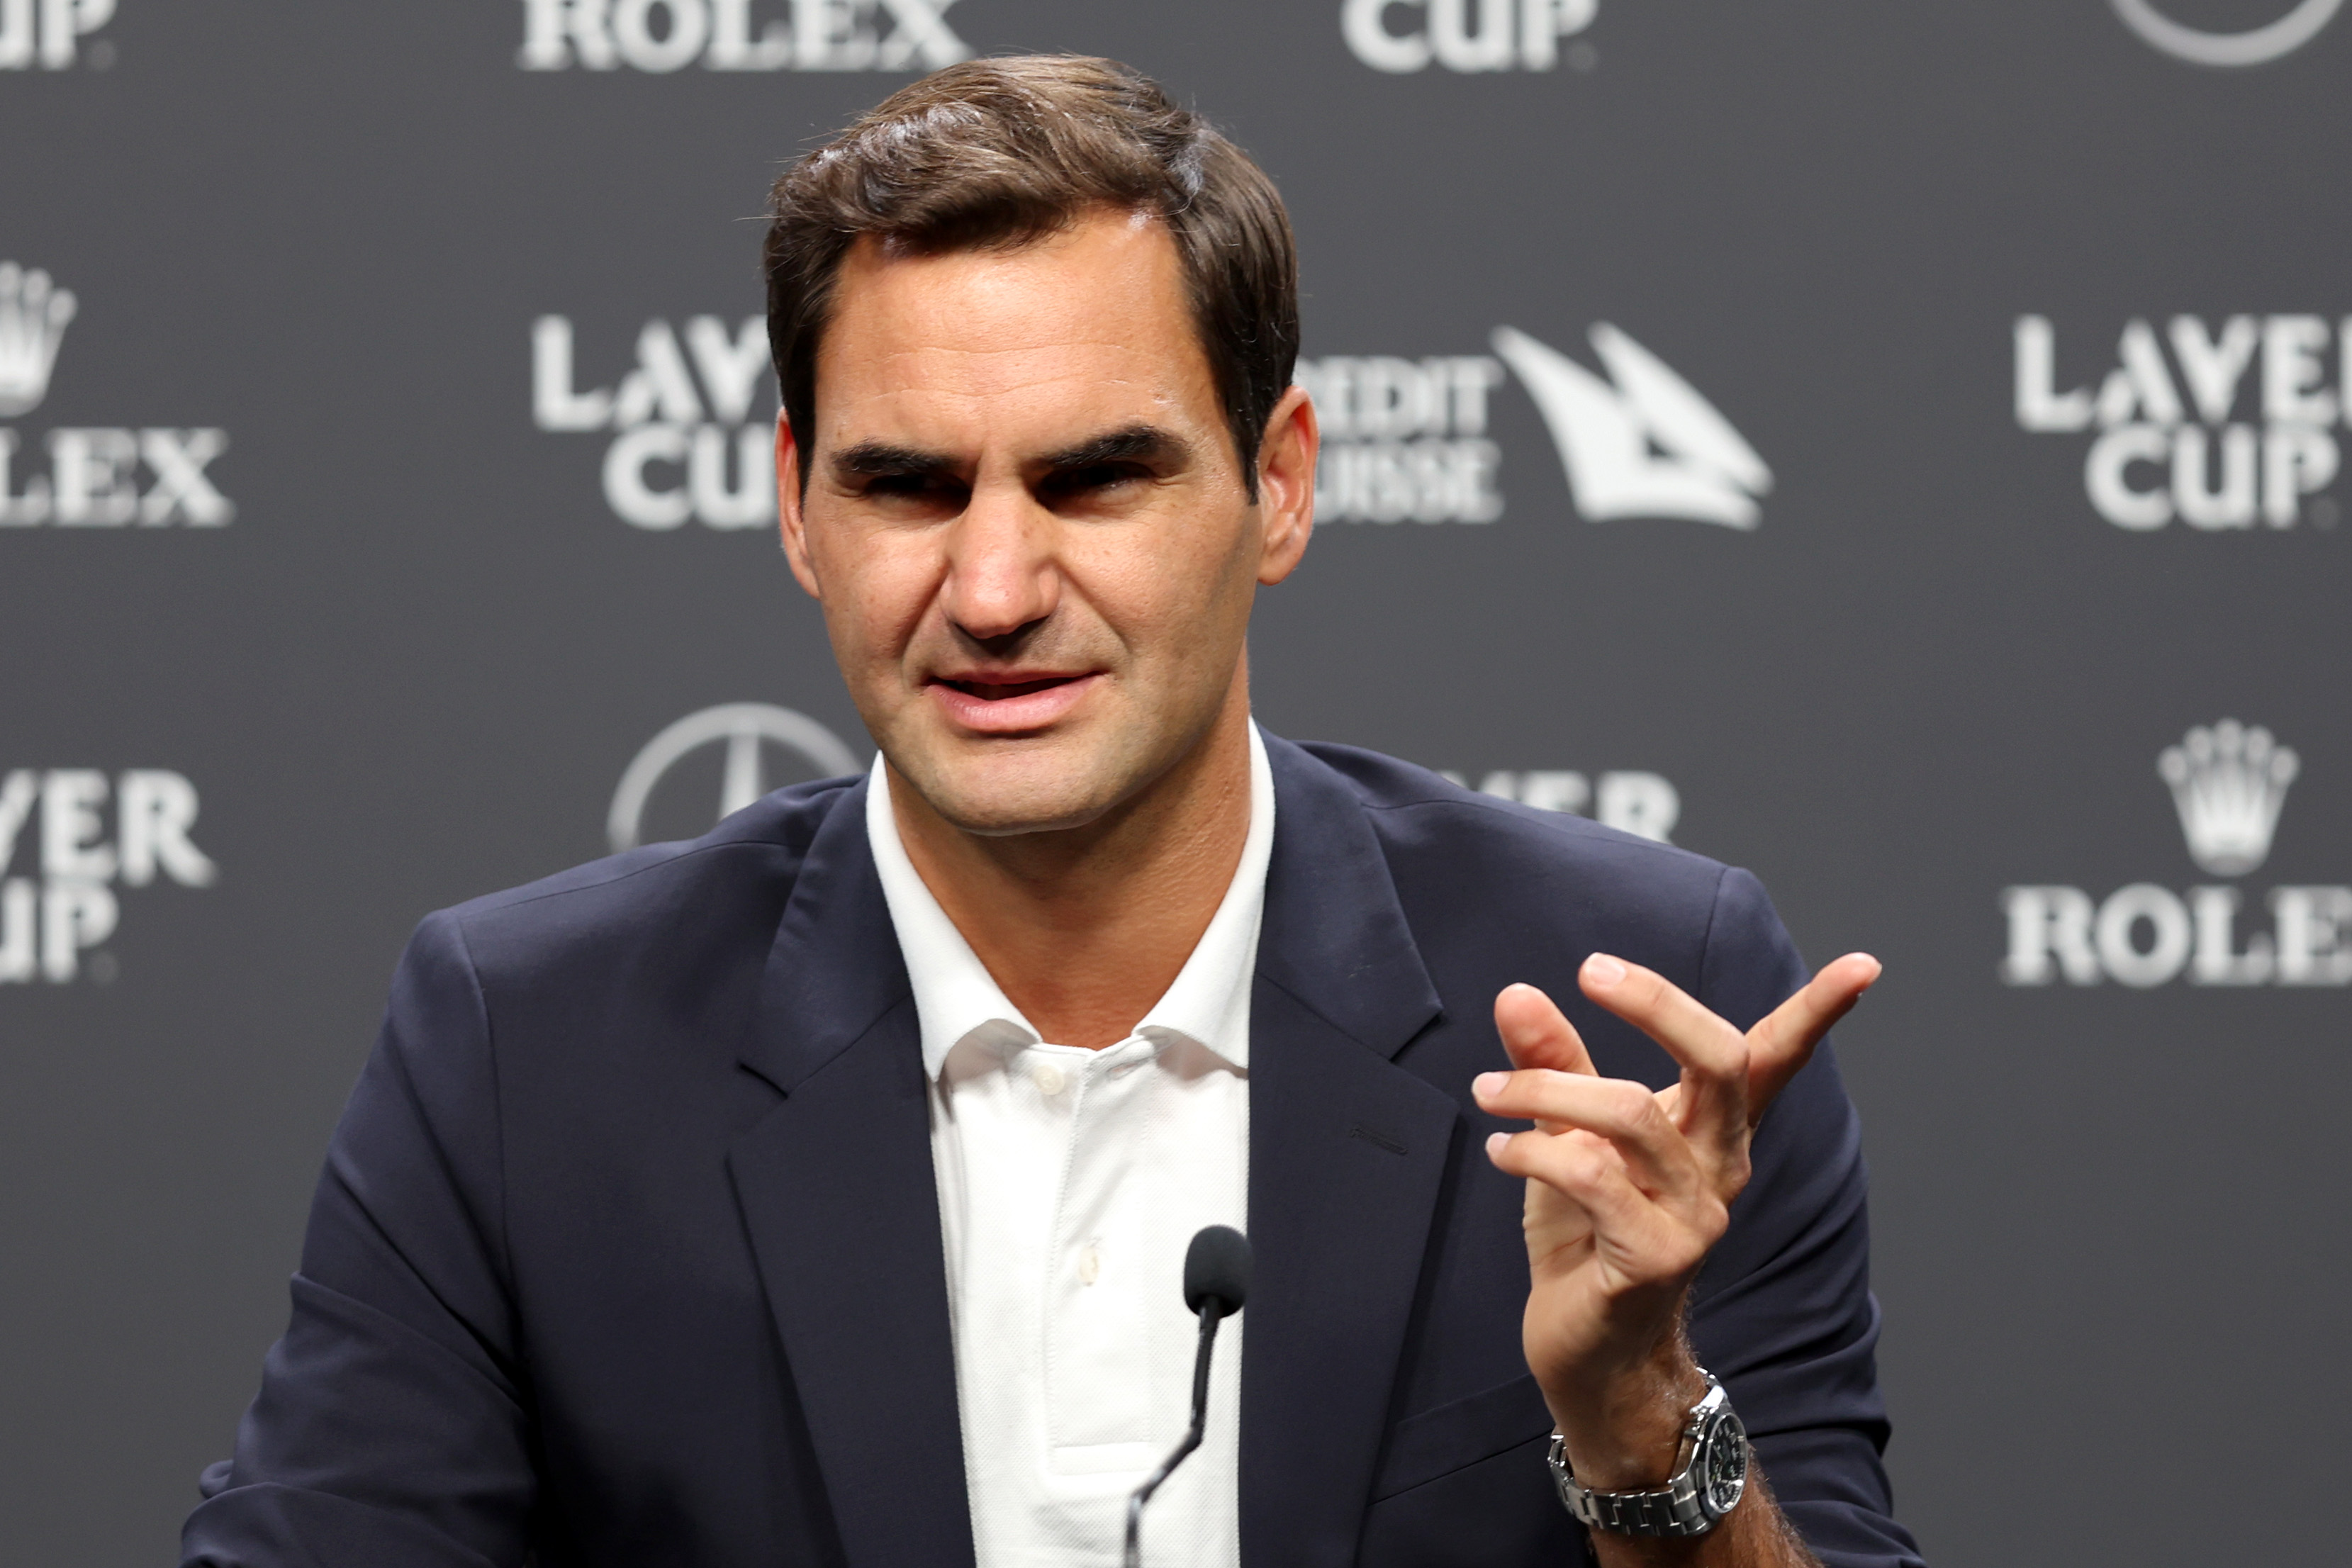 Roger Federer set to play ‘special’ final match of career on Friday with Rafael Nadal